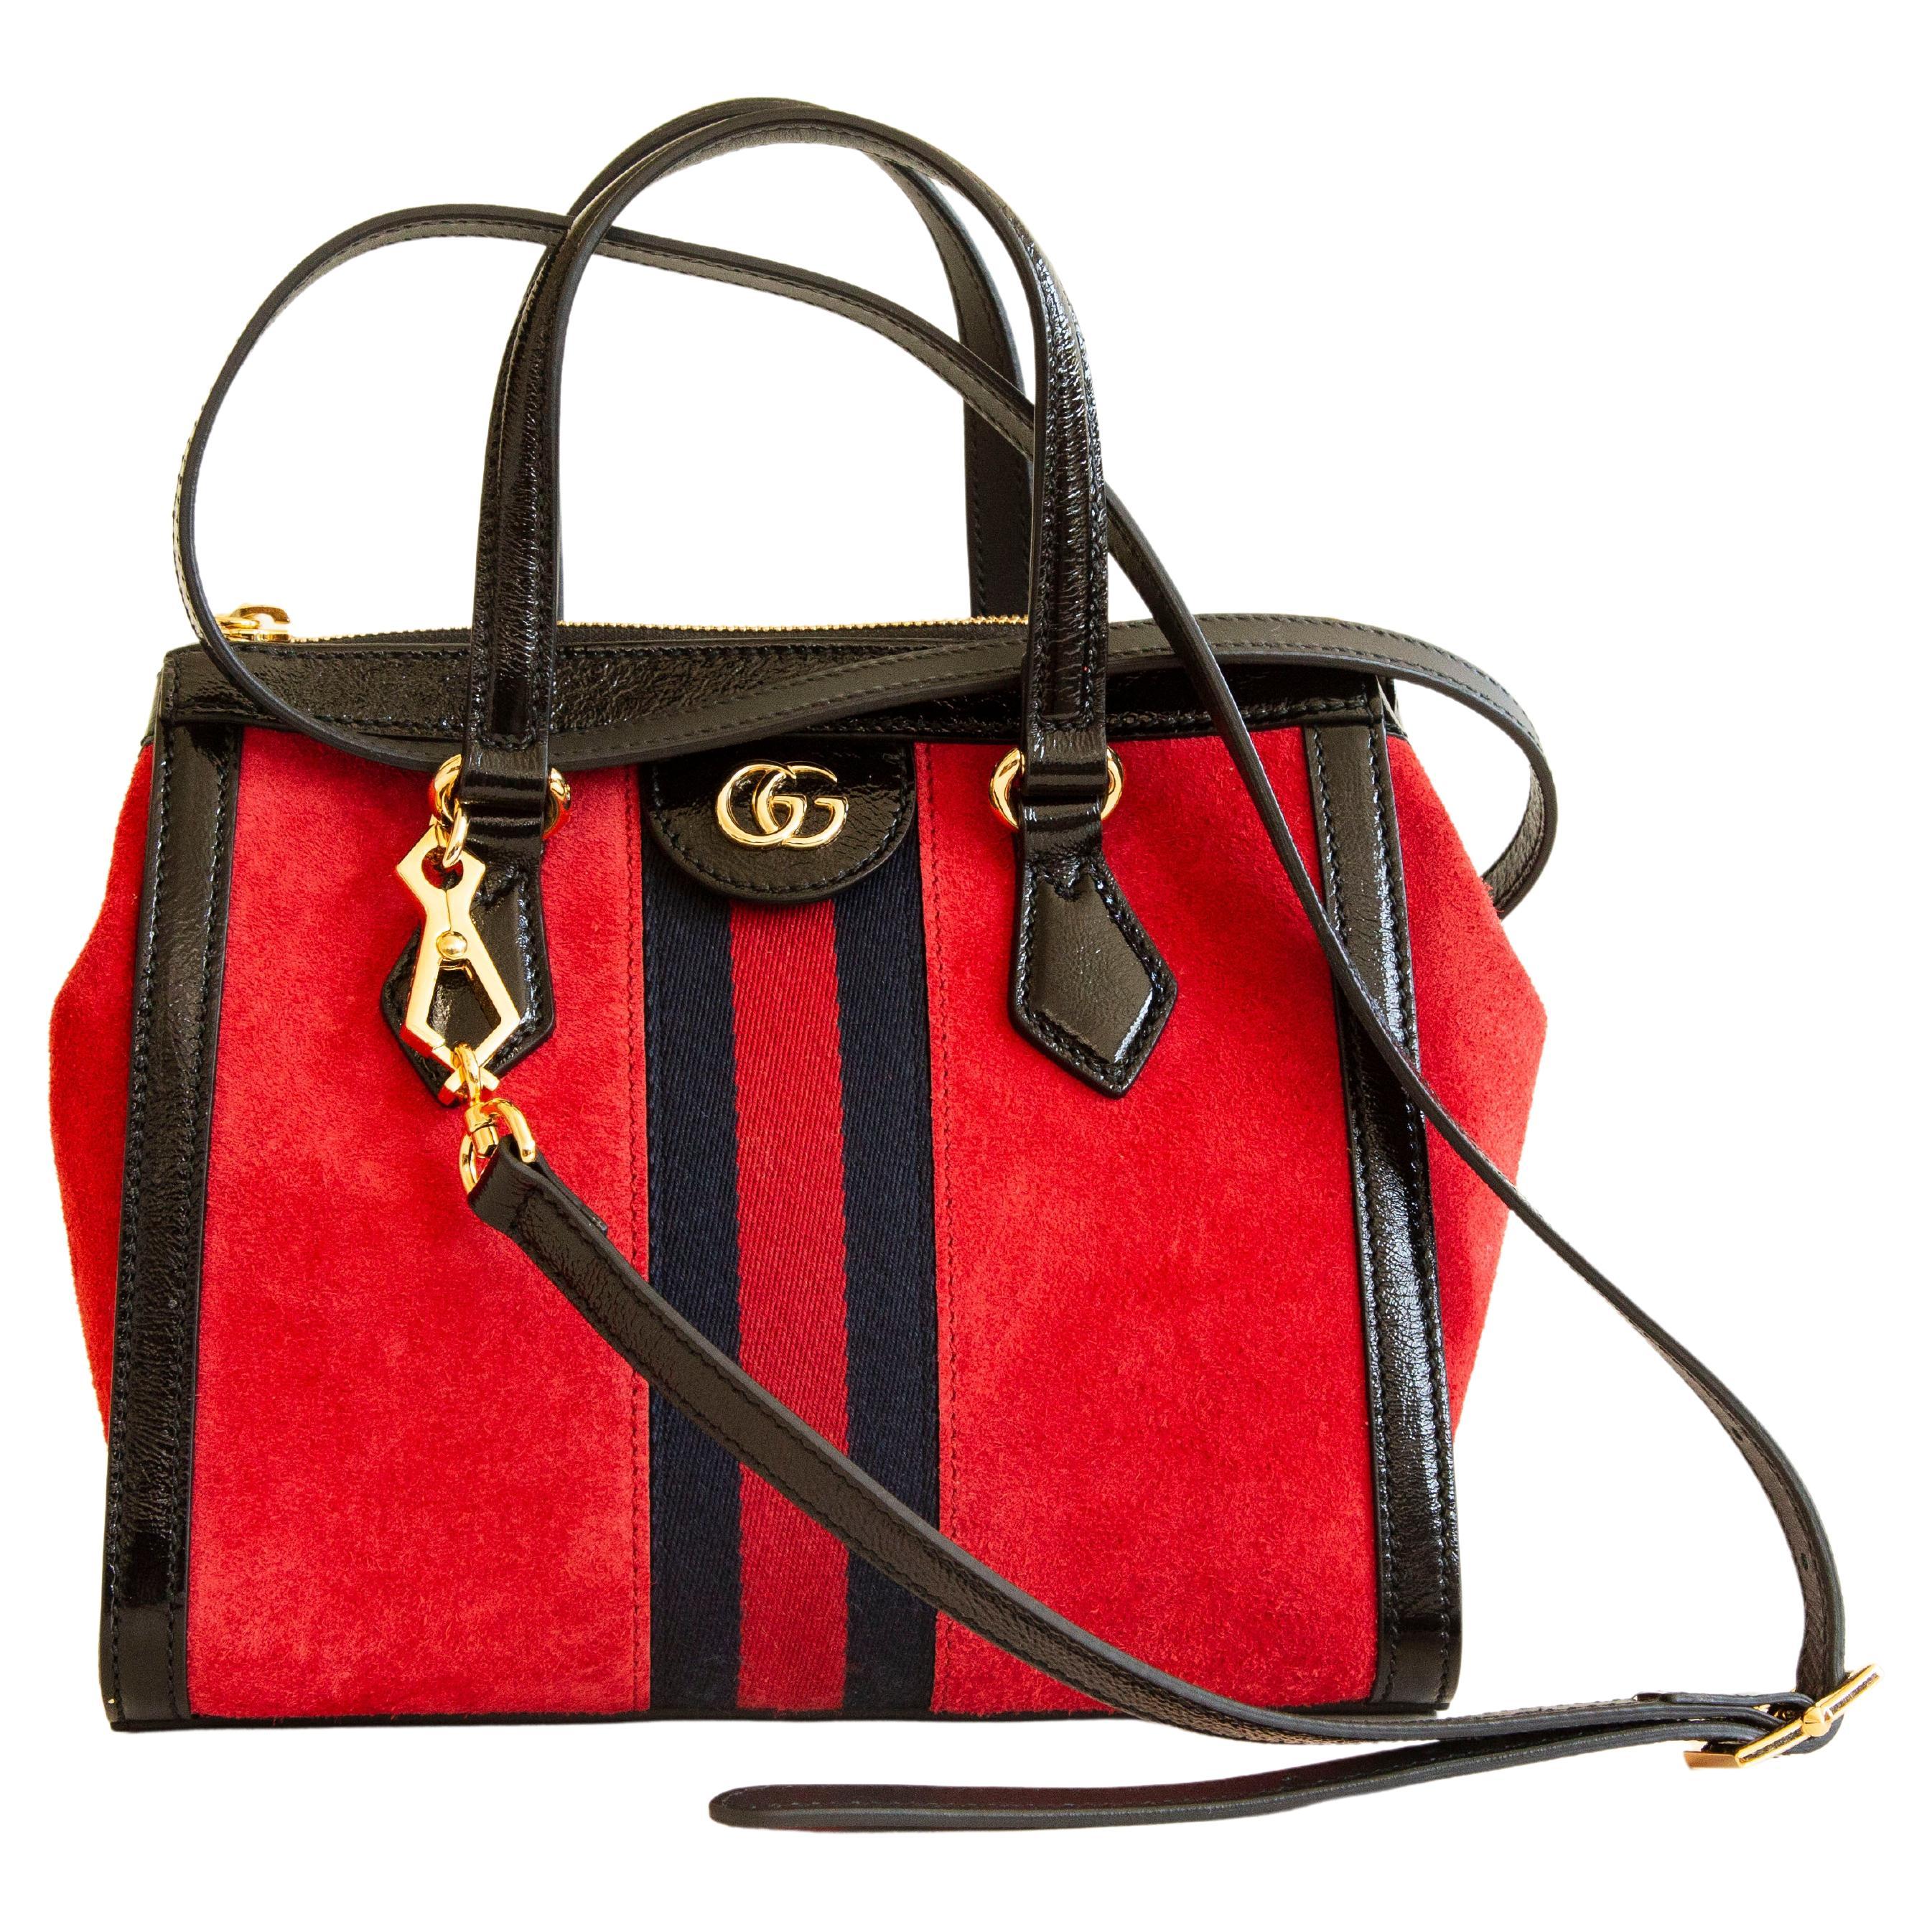 Gucci Ophidia Small Two-Way Tote in Red Suede and Black Glossy Leather Trim